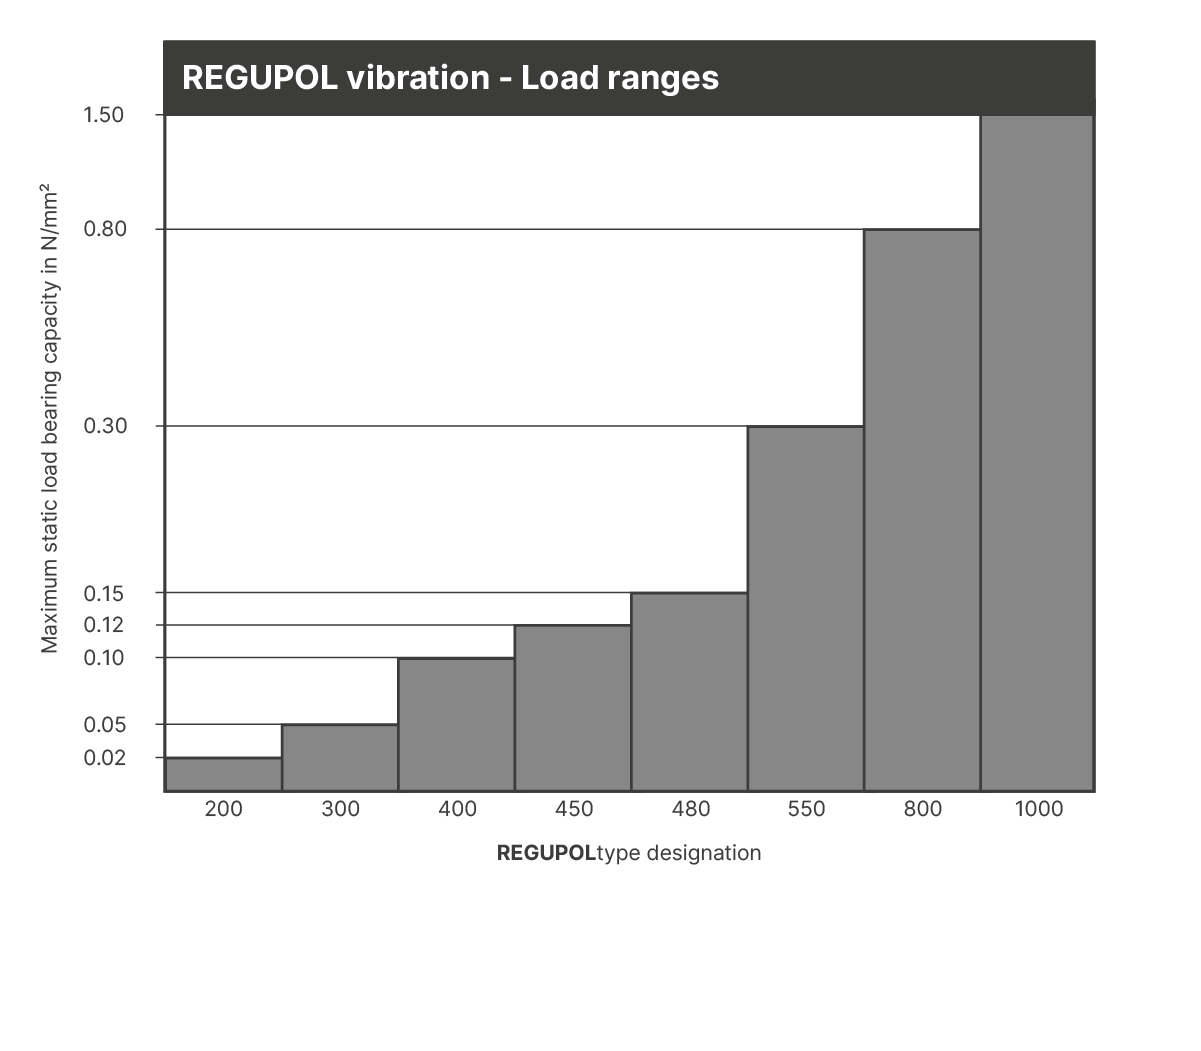 Image of a graph visualising the load range of the 8 different regupol vibration materials